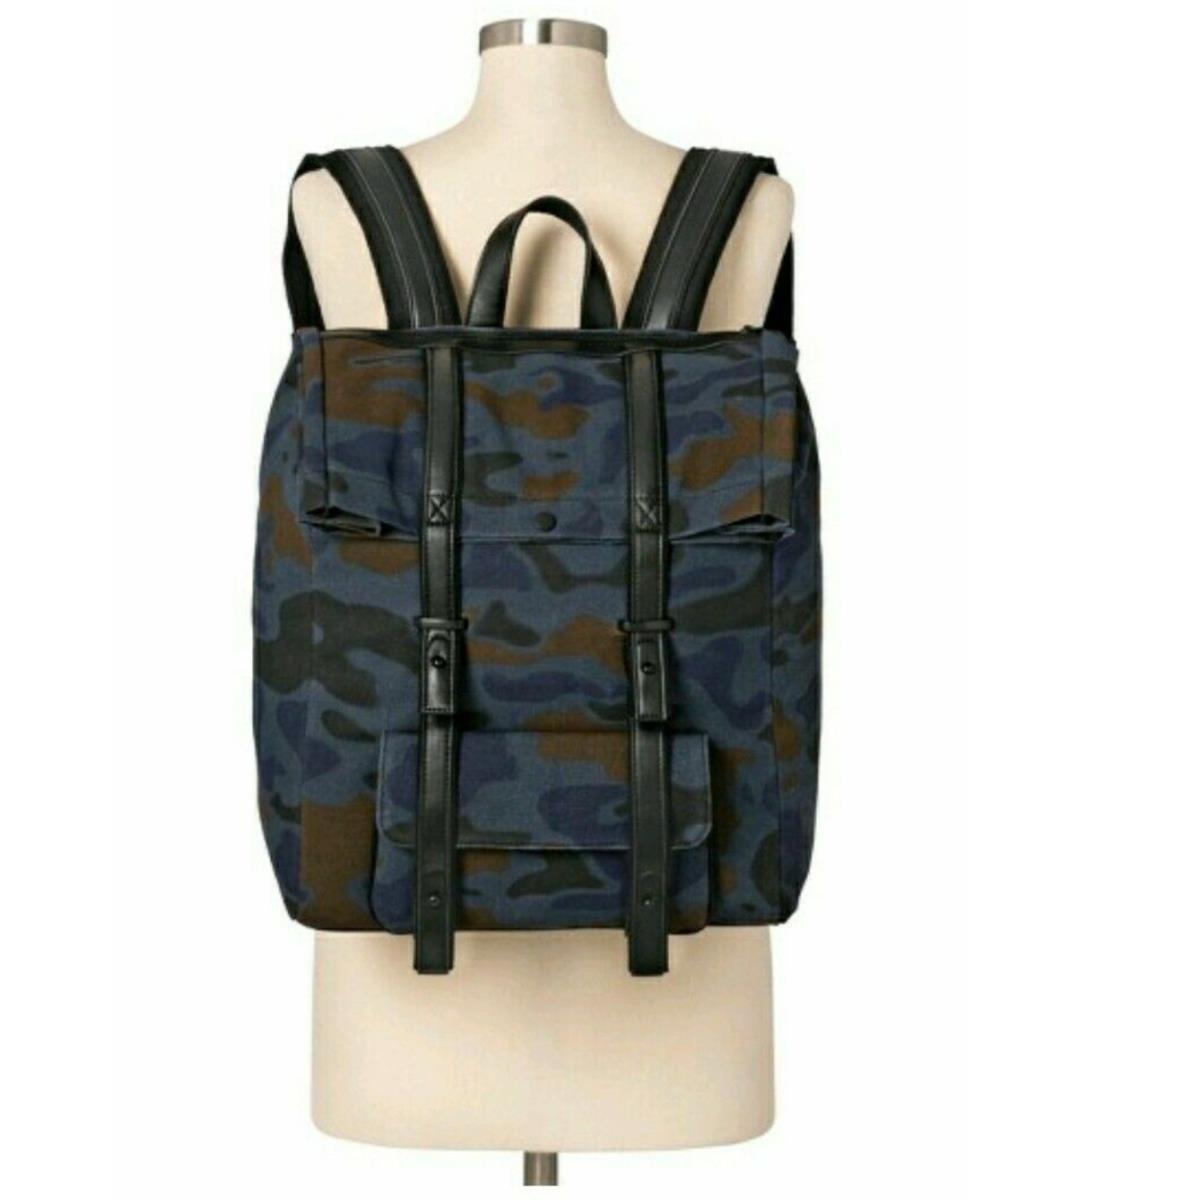 Camo Print Backpack - 3.1 Phillip Lim For Target Blue/brown